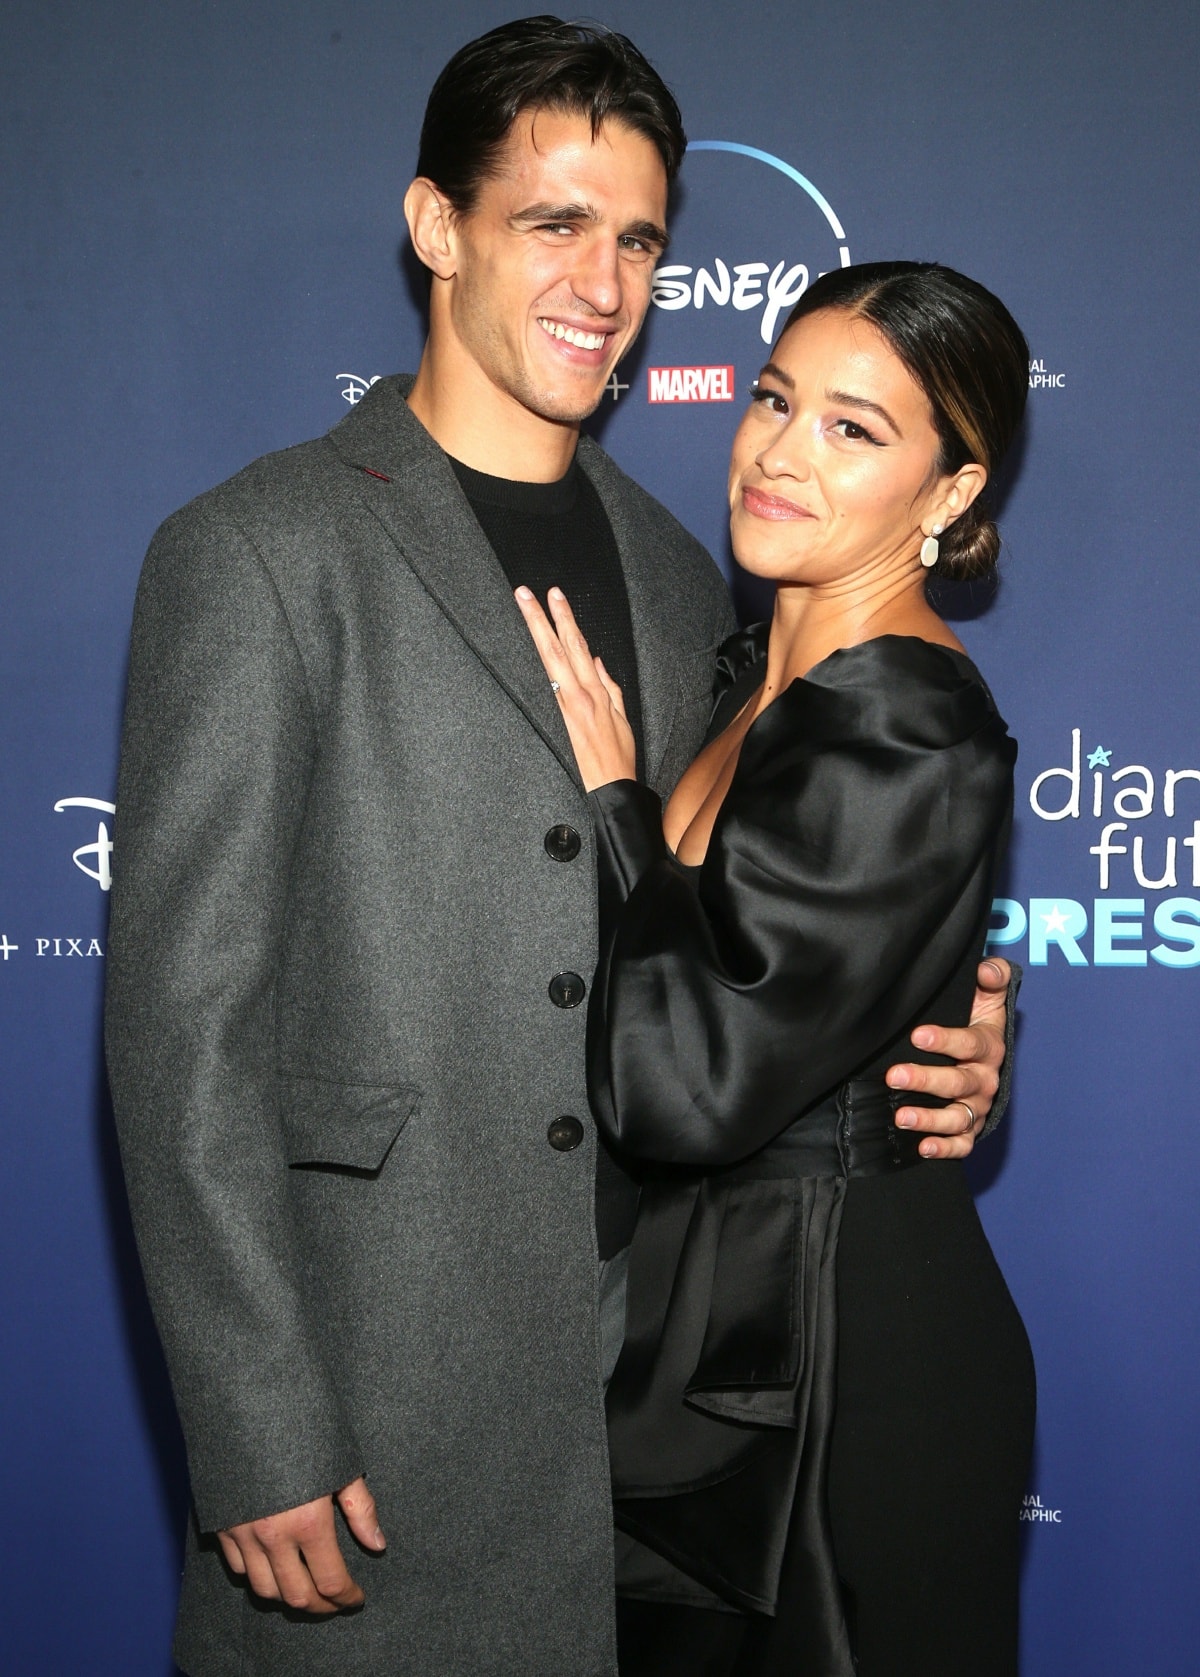 Joe LoCicero and Gina Rodriguez kept close to each other on the red carpet at the premiere of Diary of a Future President